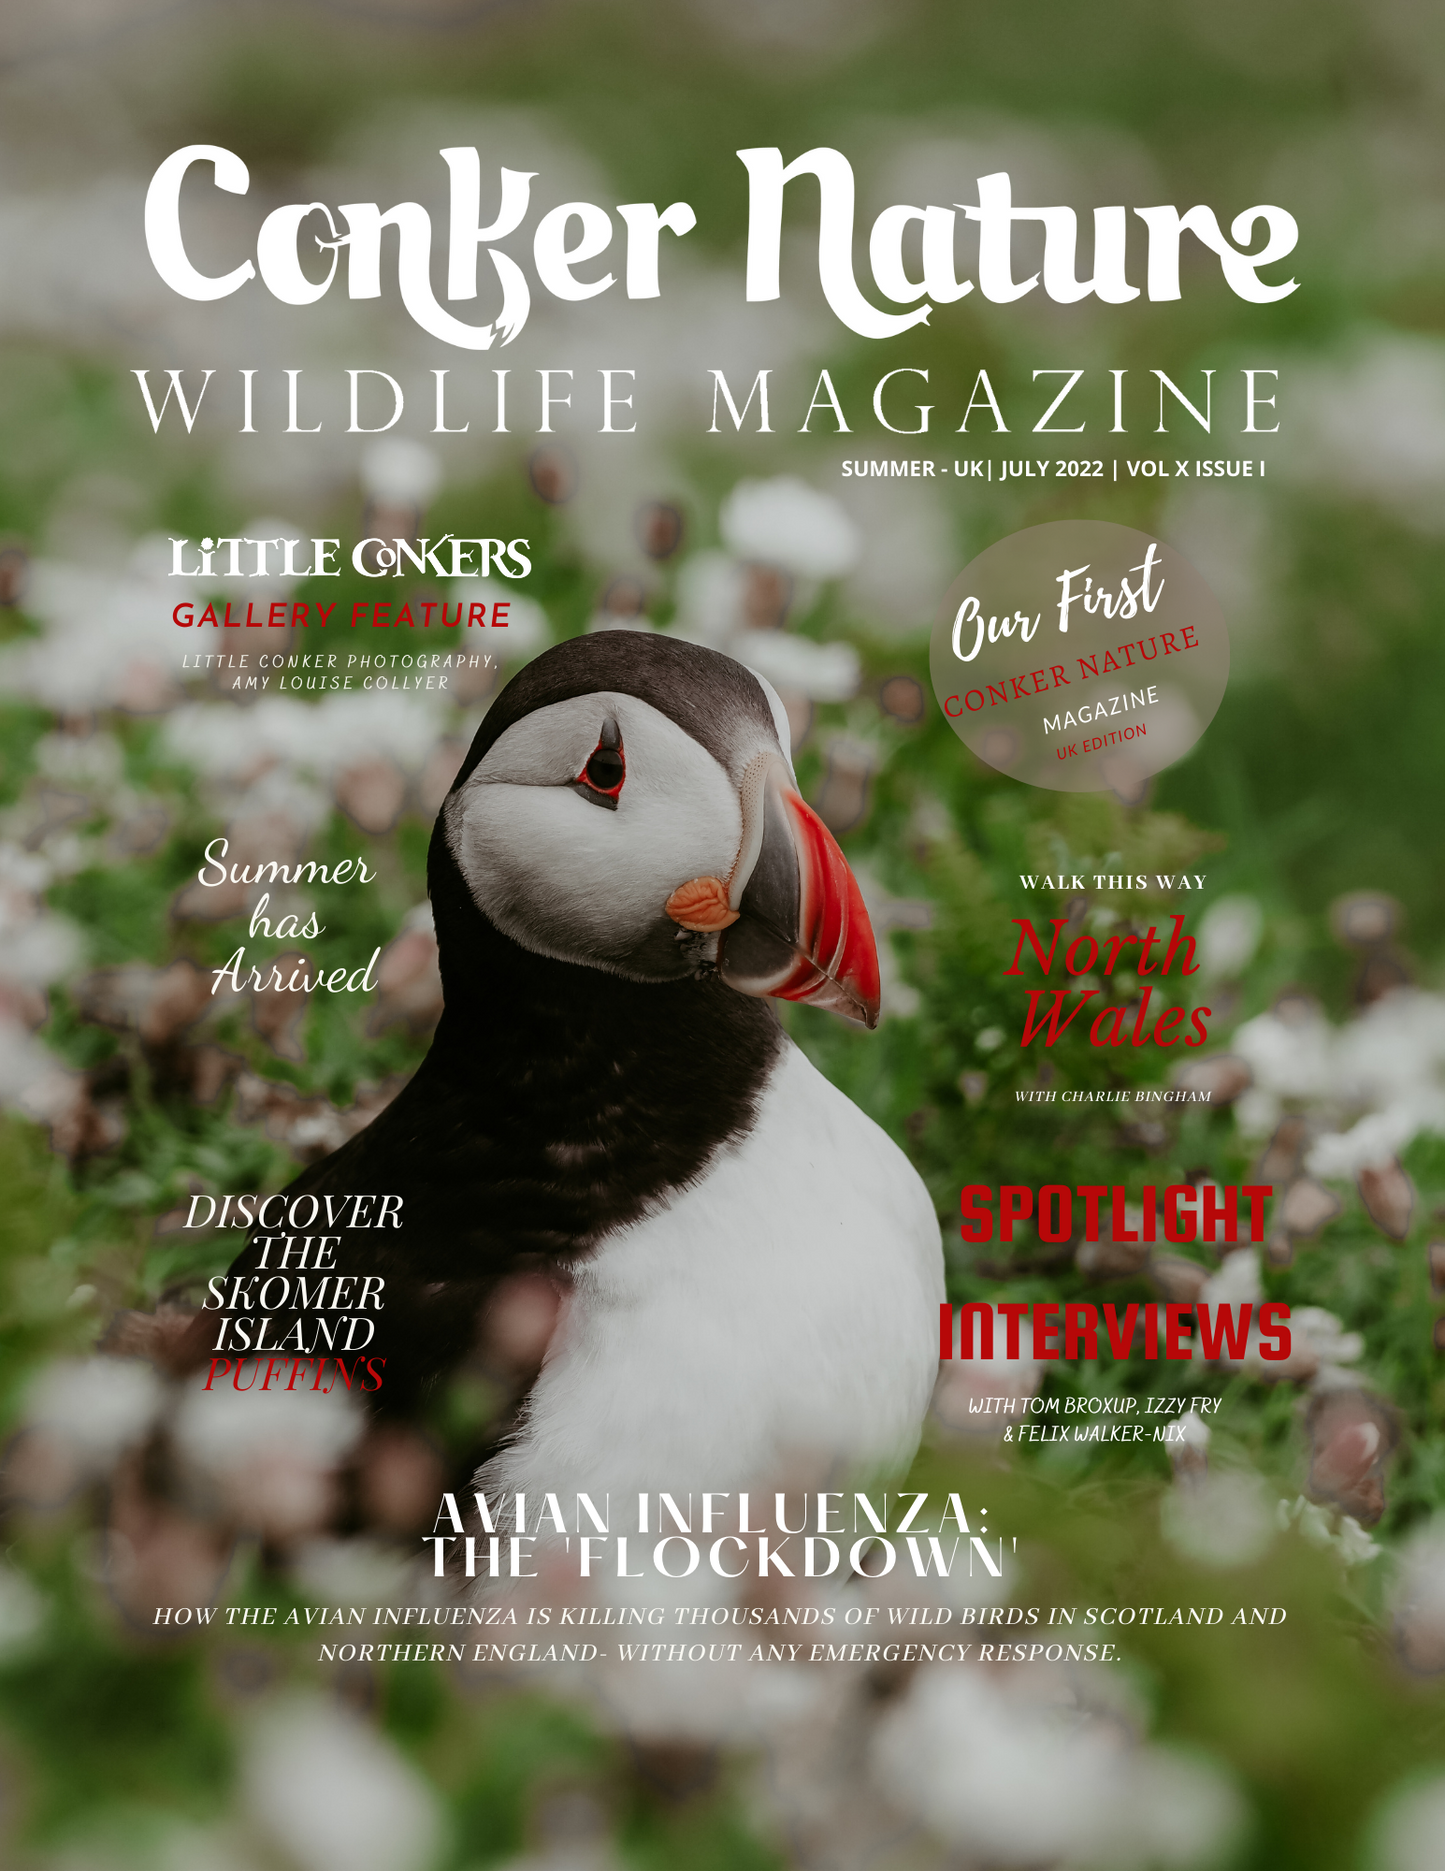 CONKER NATURE MAGAZINE SUMMER | JULY 2022 | VOL X ISSUE I | UK EDITION